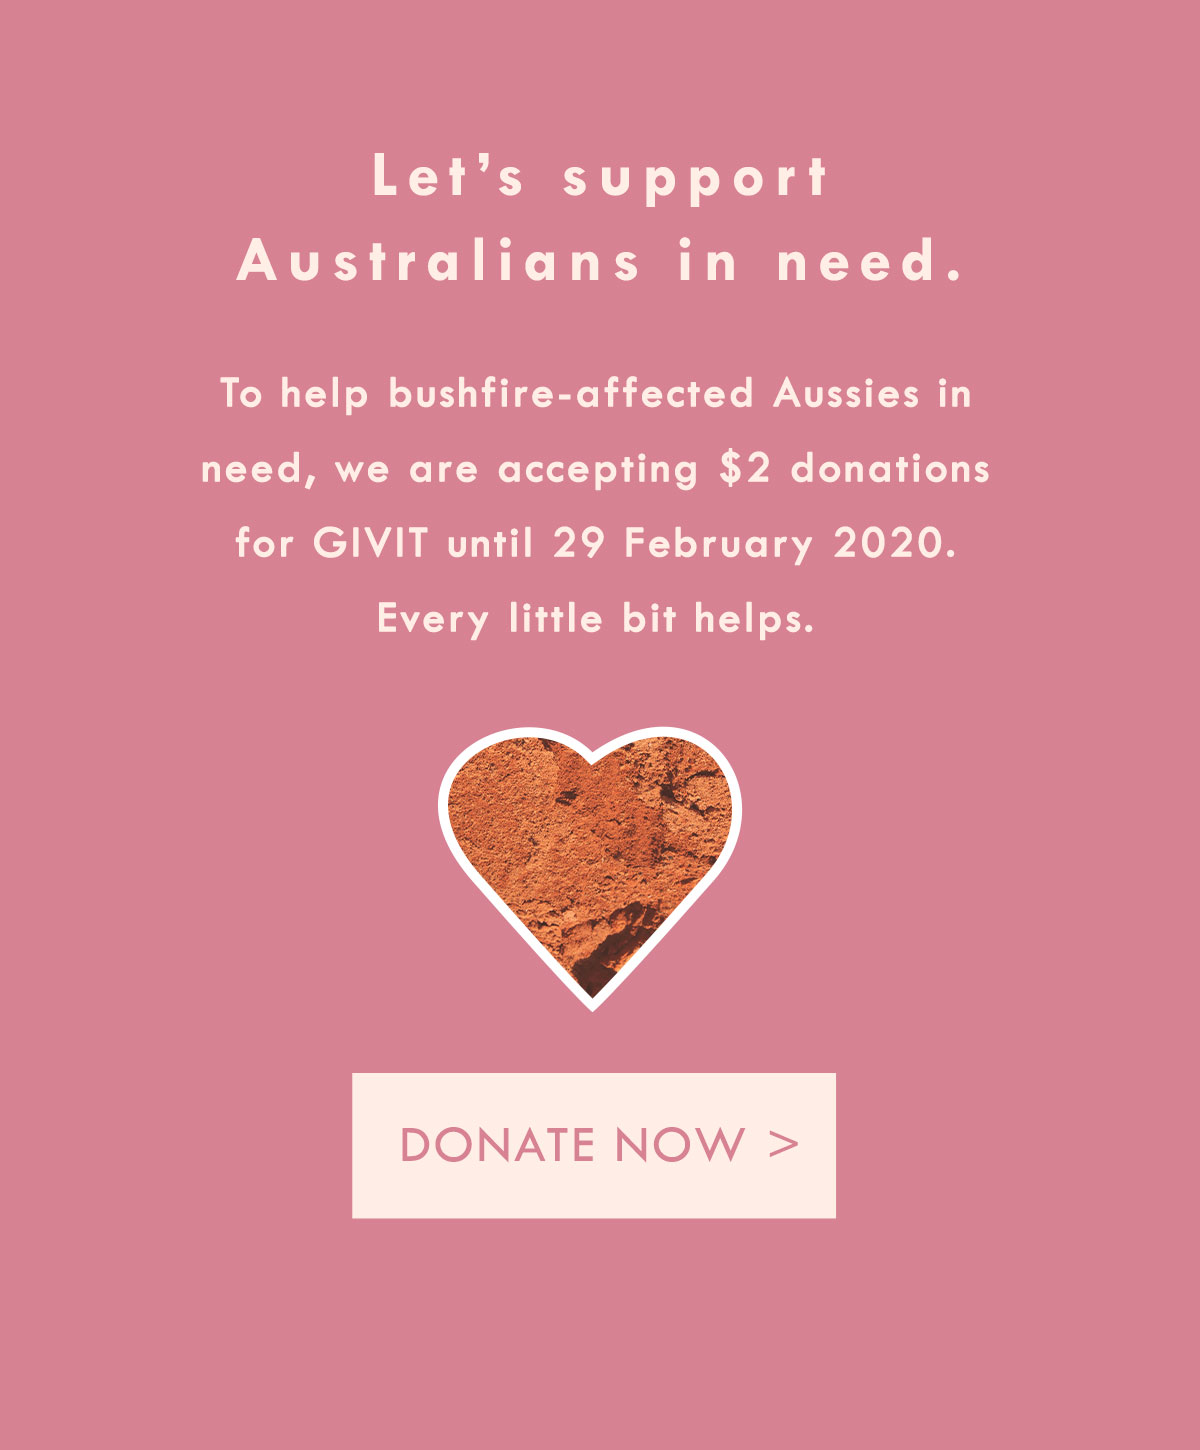 Let's support Australians in need. To help bushfire-affected Aussies in need, we are accepting $2 donations for GIVIT until 29 February 2020. Donate now.